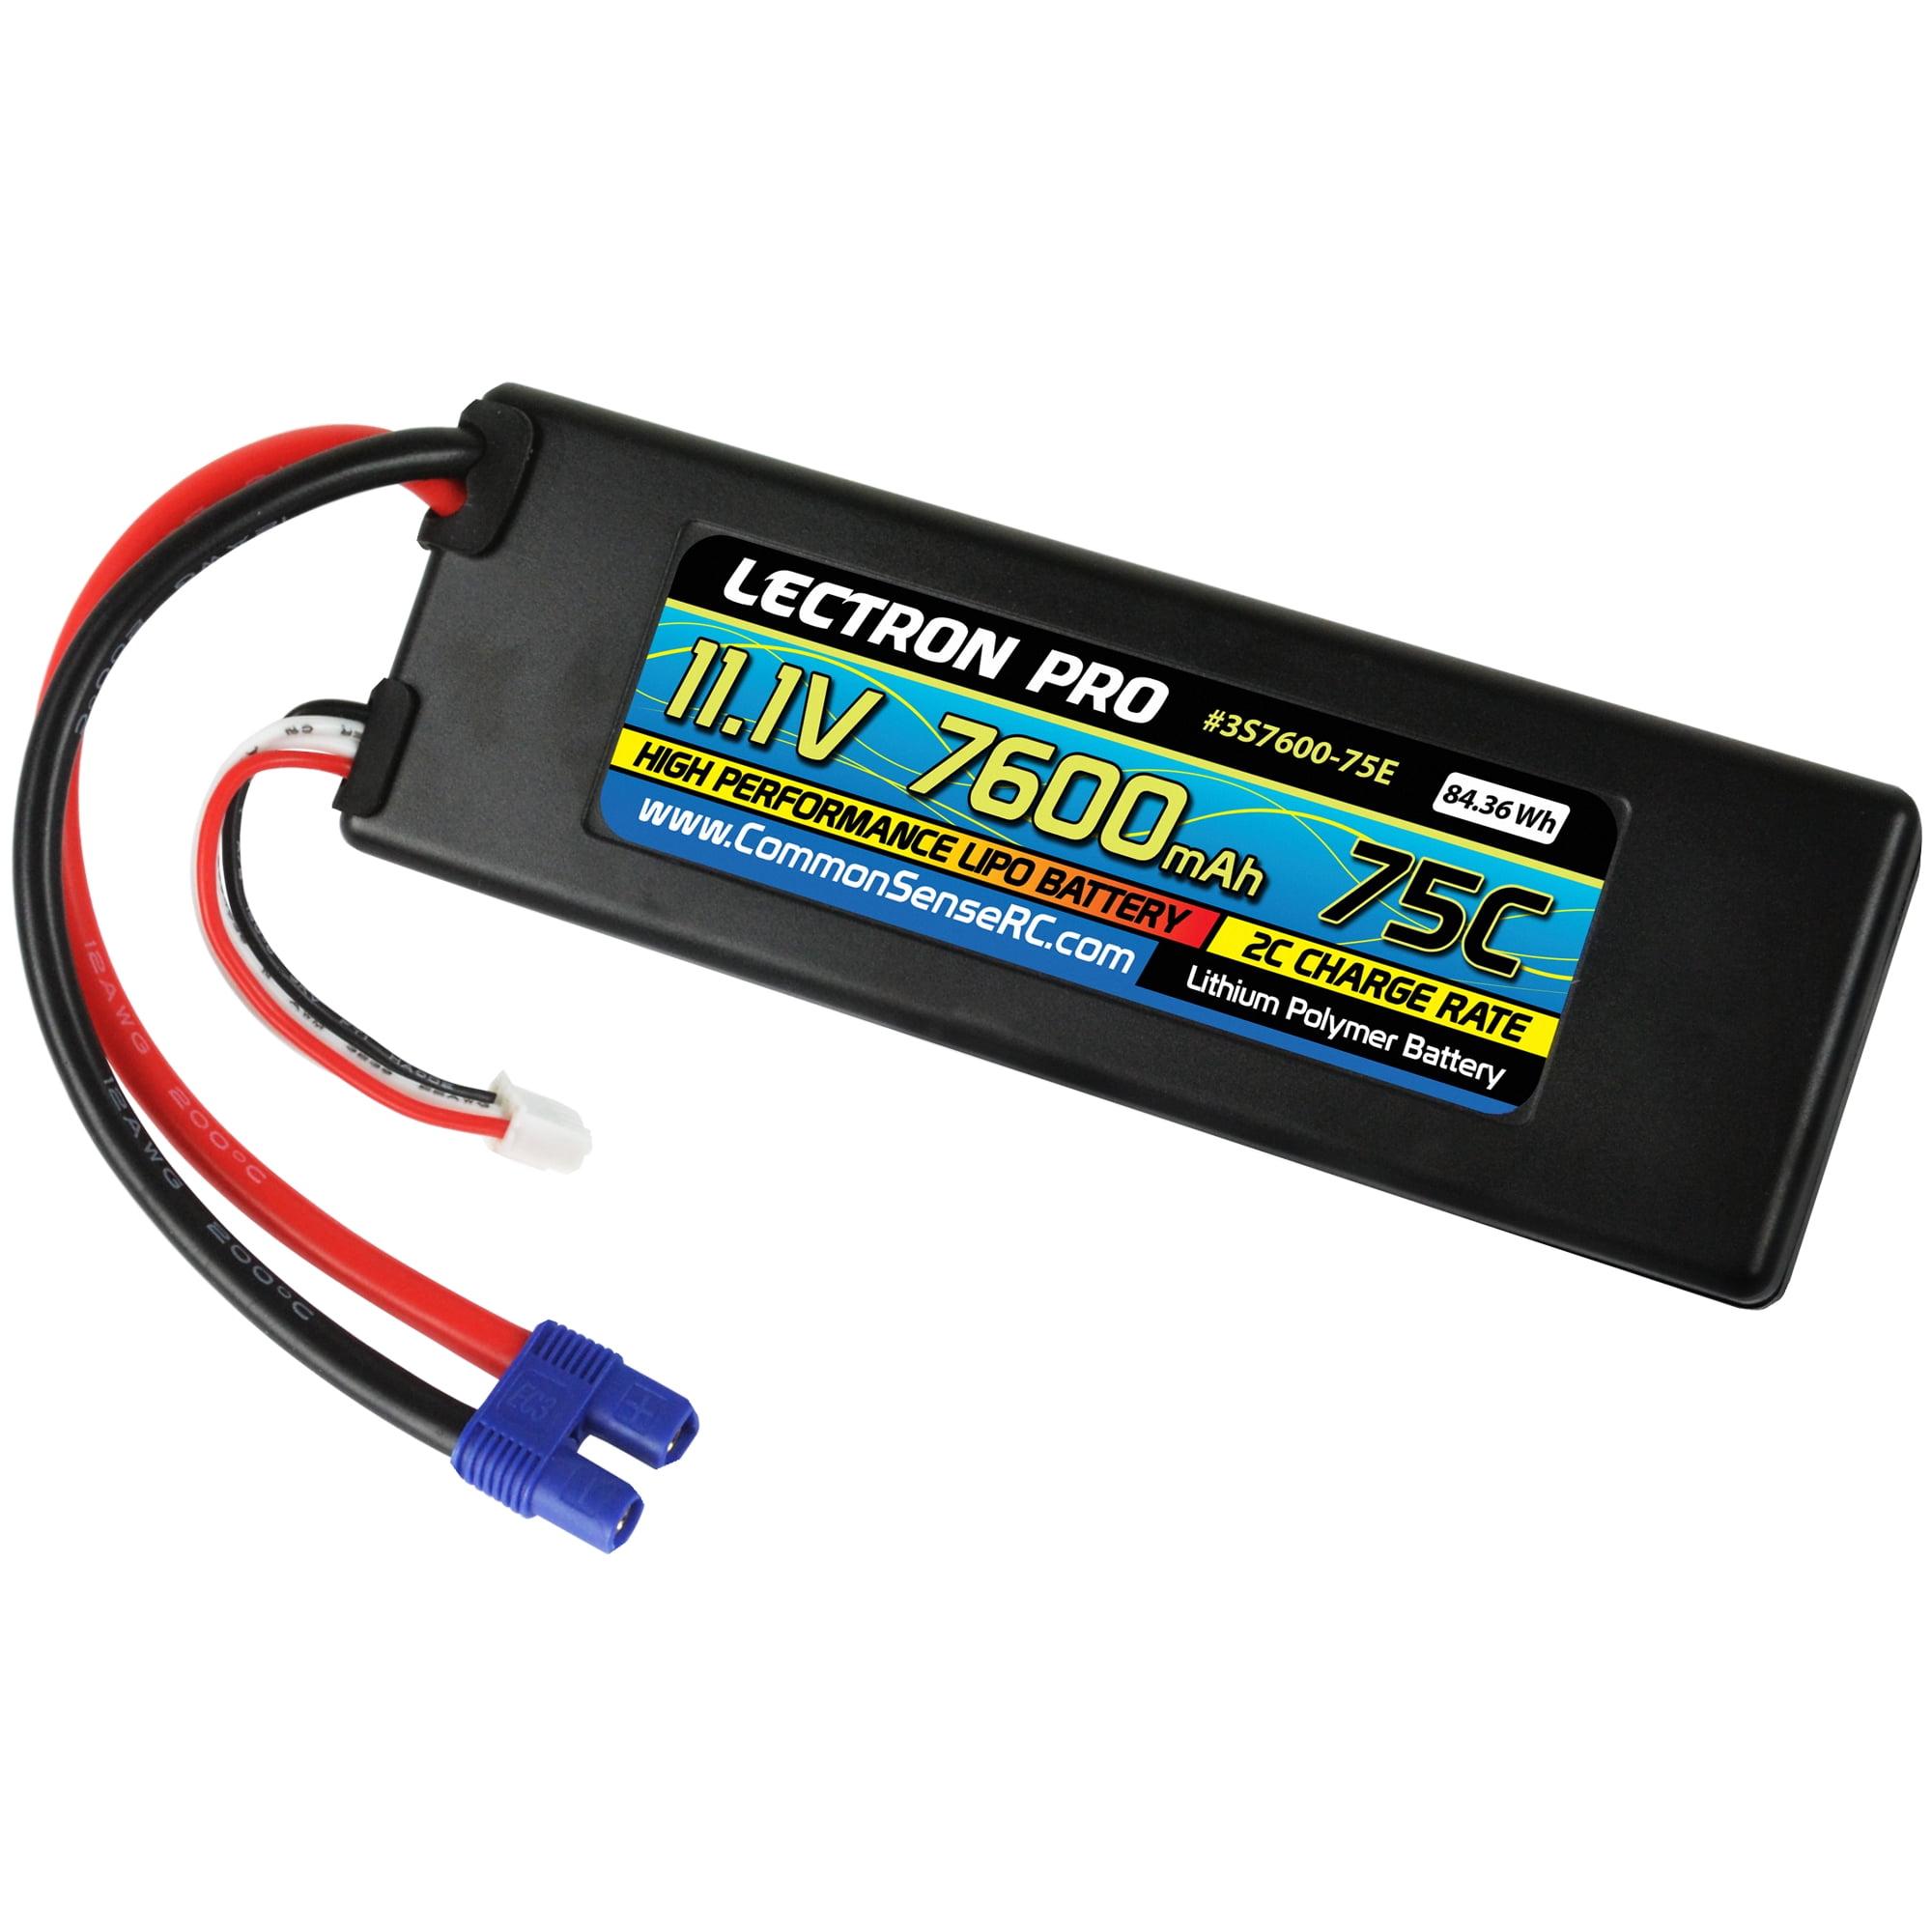 Lectron Pro 3.7V 1000mAh 30C Lipo Battery with JST Connector for Dromida Vista 2 Pack 